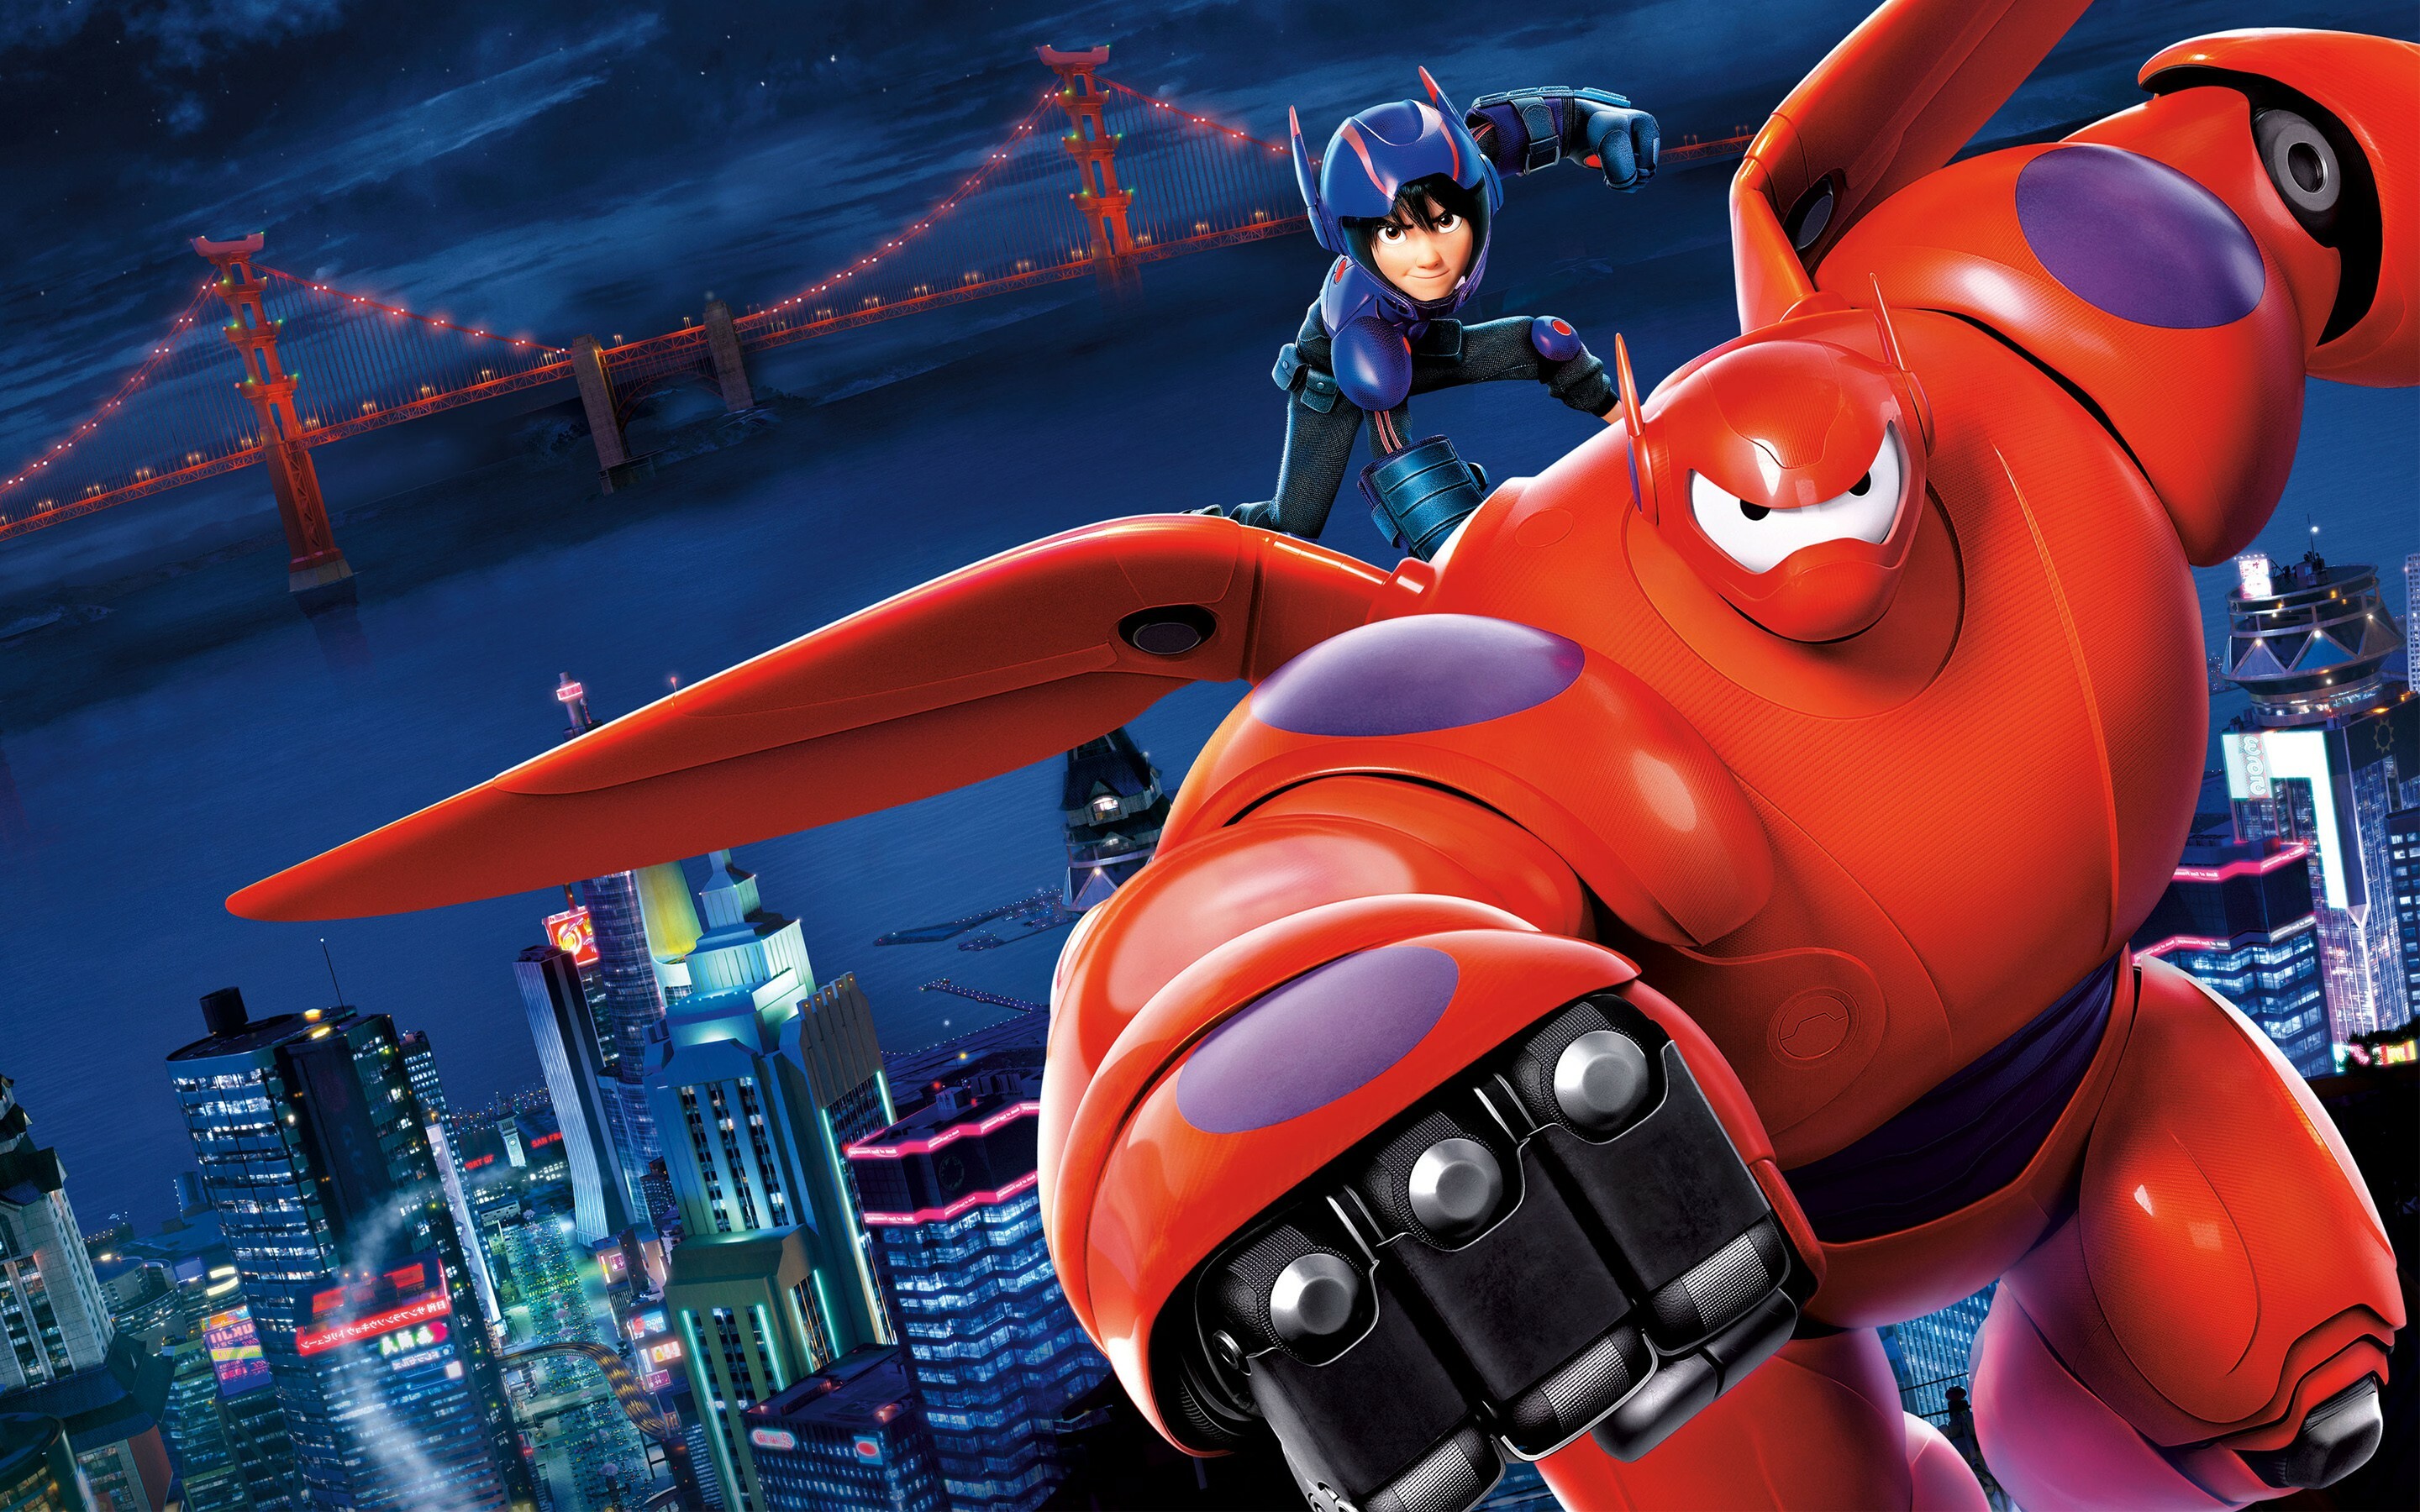 Big Hero 6: A superhero team combating a masked villain who is responsible for Tadashi's death. 2880x1800 HD Wallpaper.